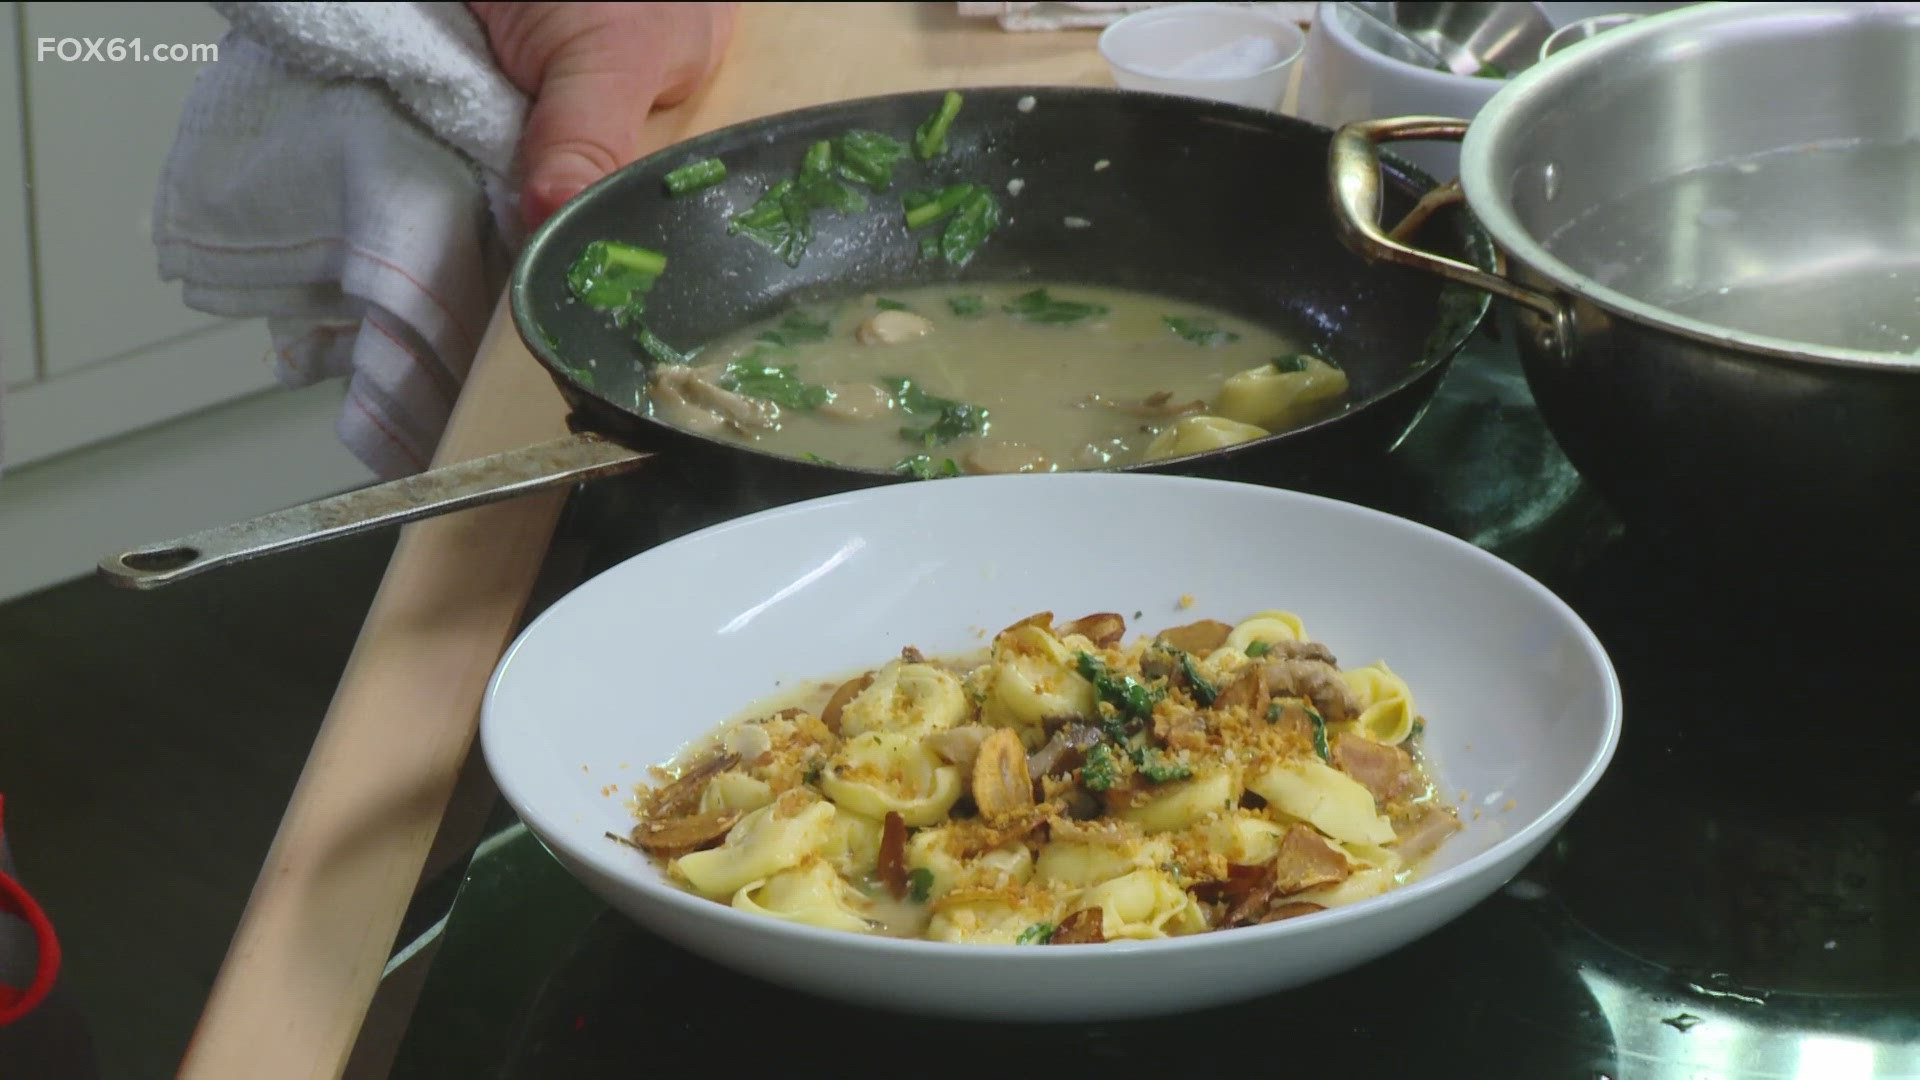 Butchers & Bakers' springtime menu is in full swing, and in the FOX61 Kitchen, we make tortellini with garlic and dandelion greens.